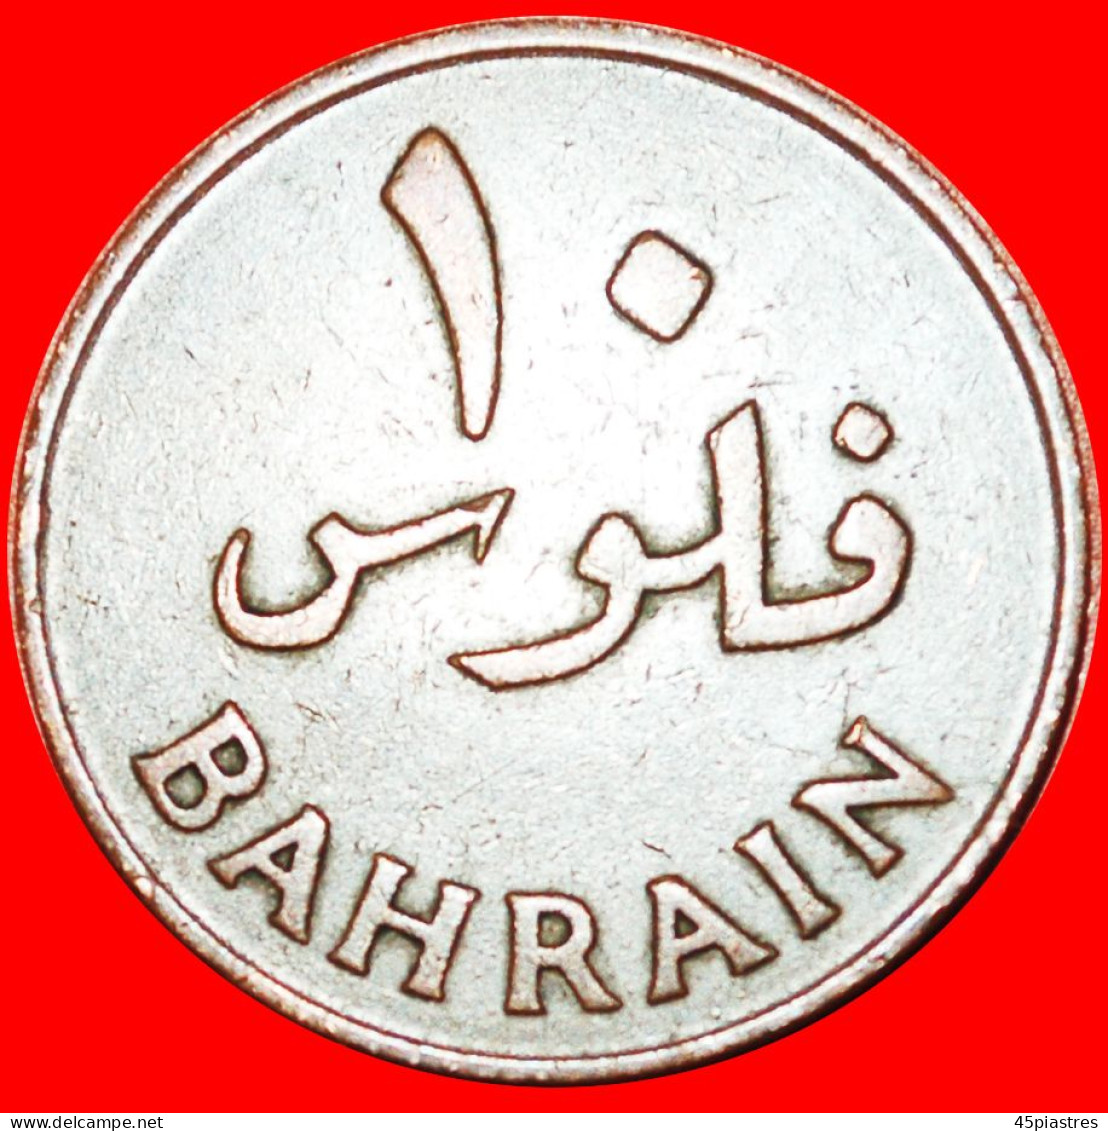 * GREAT BRITAIN: STATE Of BAHRAIN  10 FILS 1385-1965! PALM! · LOW START! · NO RESERVE!!! - Bahrein